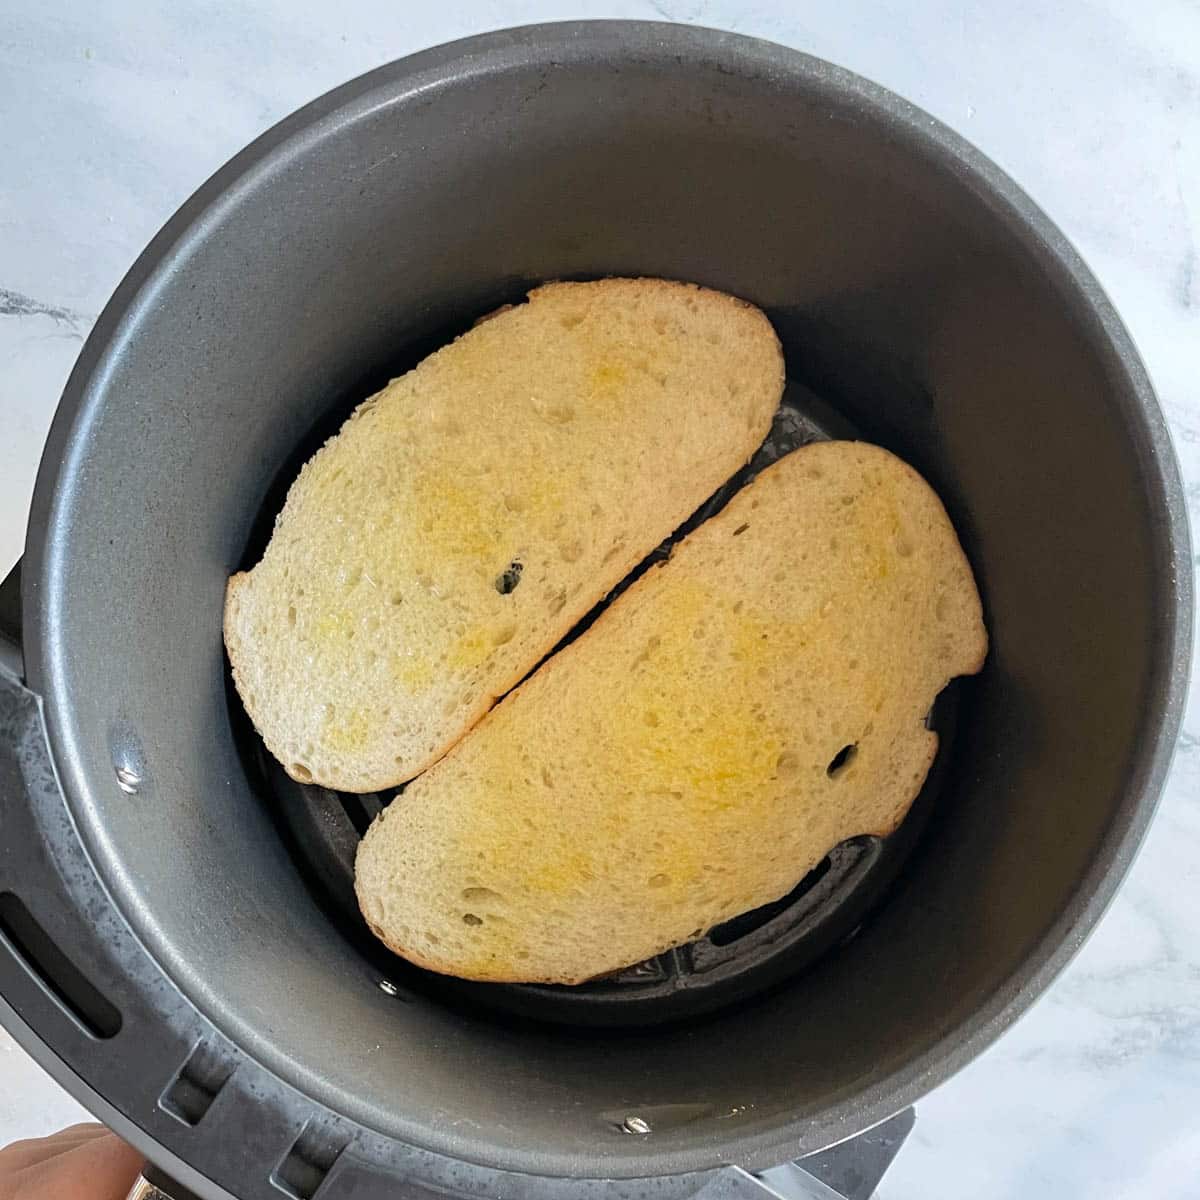 Two slices of bread brushed with olive oil are shown in the basket of an air fryer.